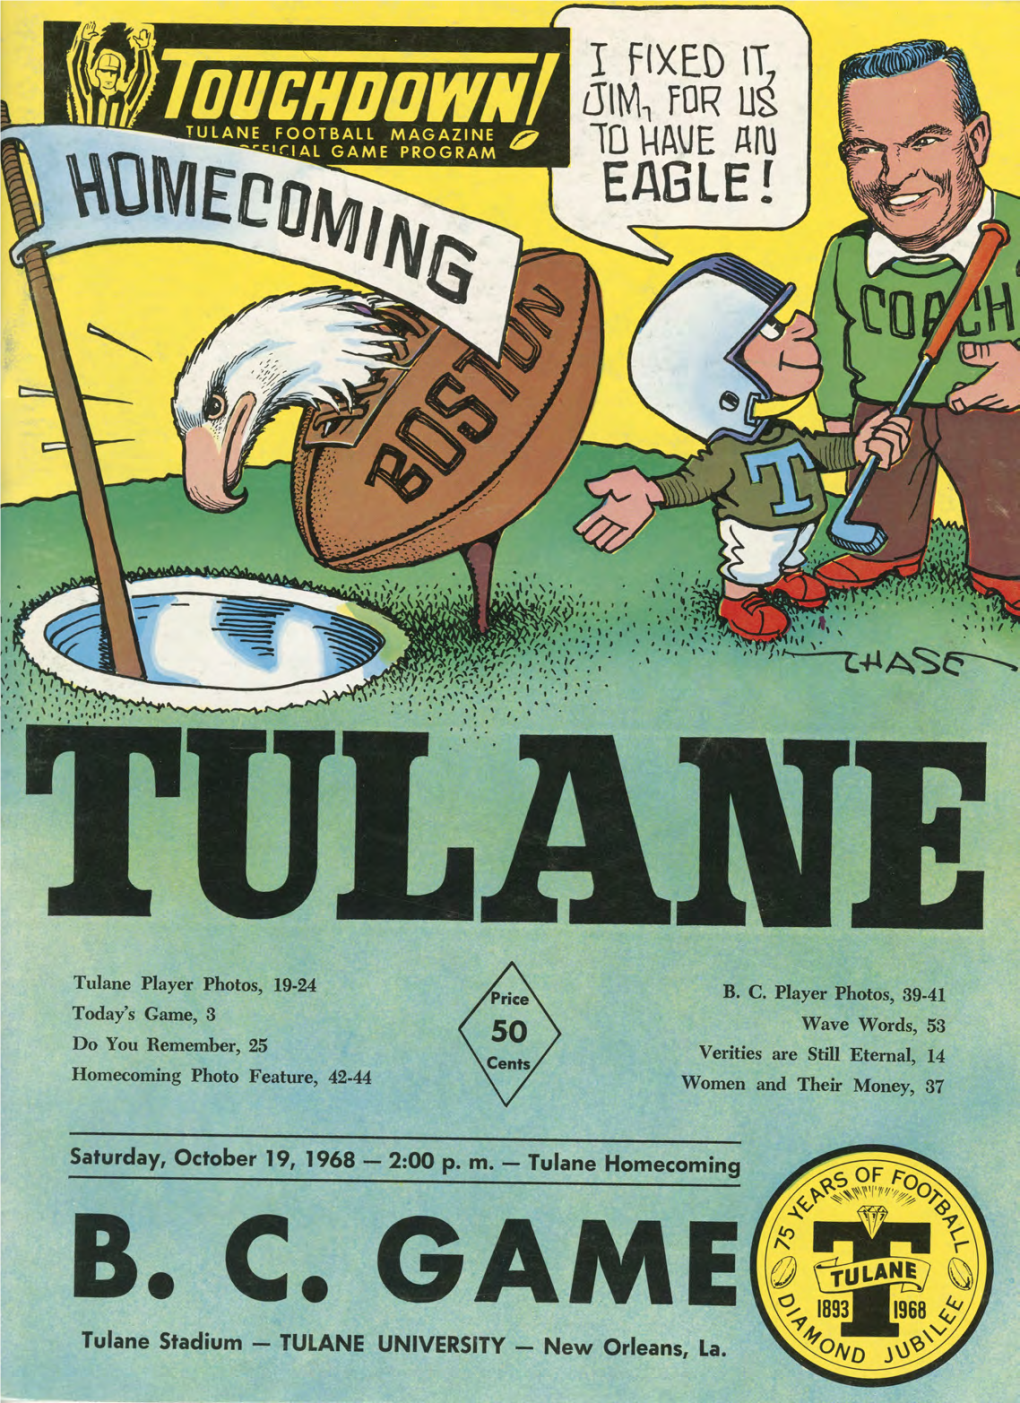 The Tulane Football Magazine and Official Game Program PAGE 1 Tulane and the Co111munity